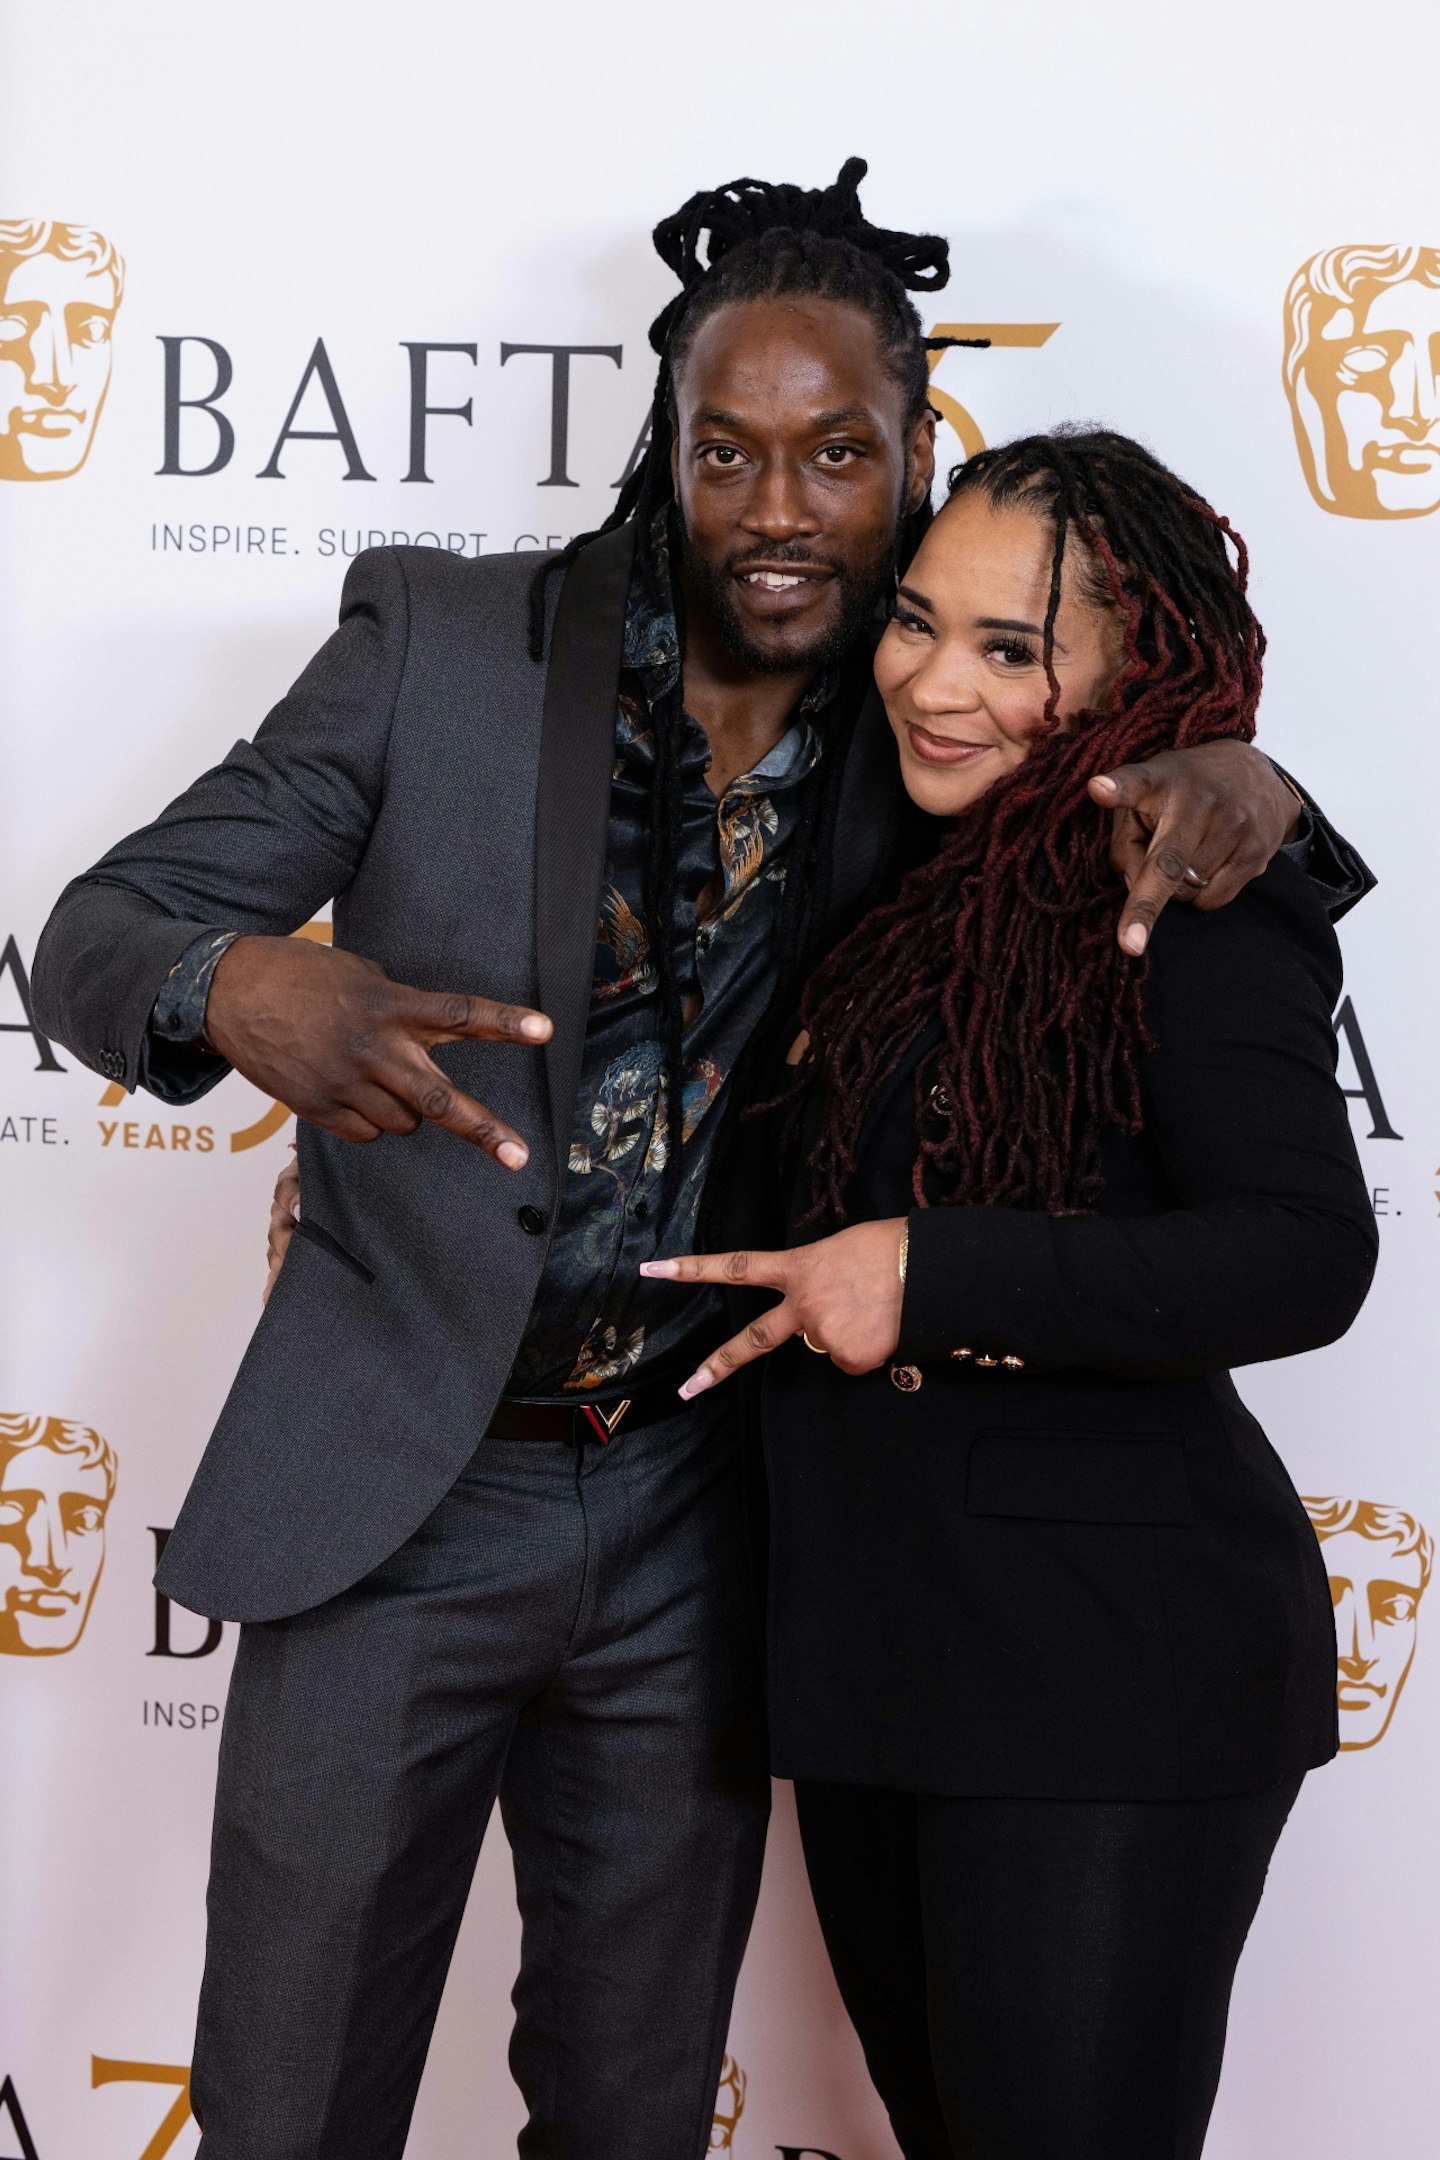 Marcus and Mica from Gogglebox on the red carpet at the BAFTAs